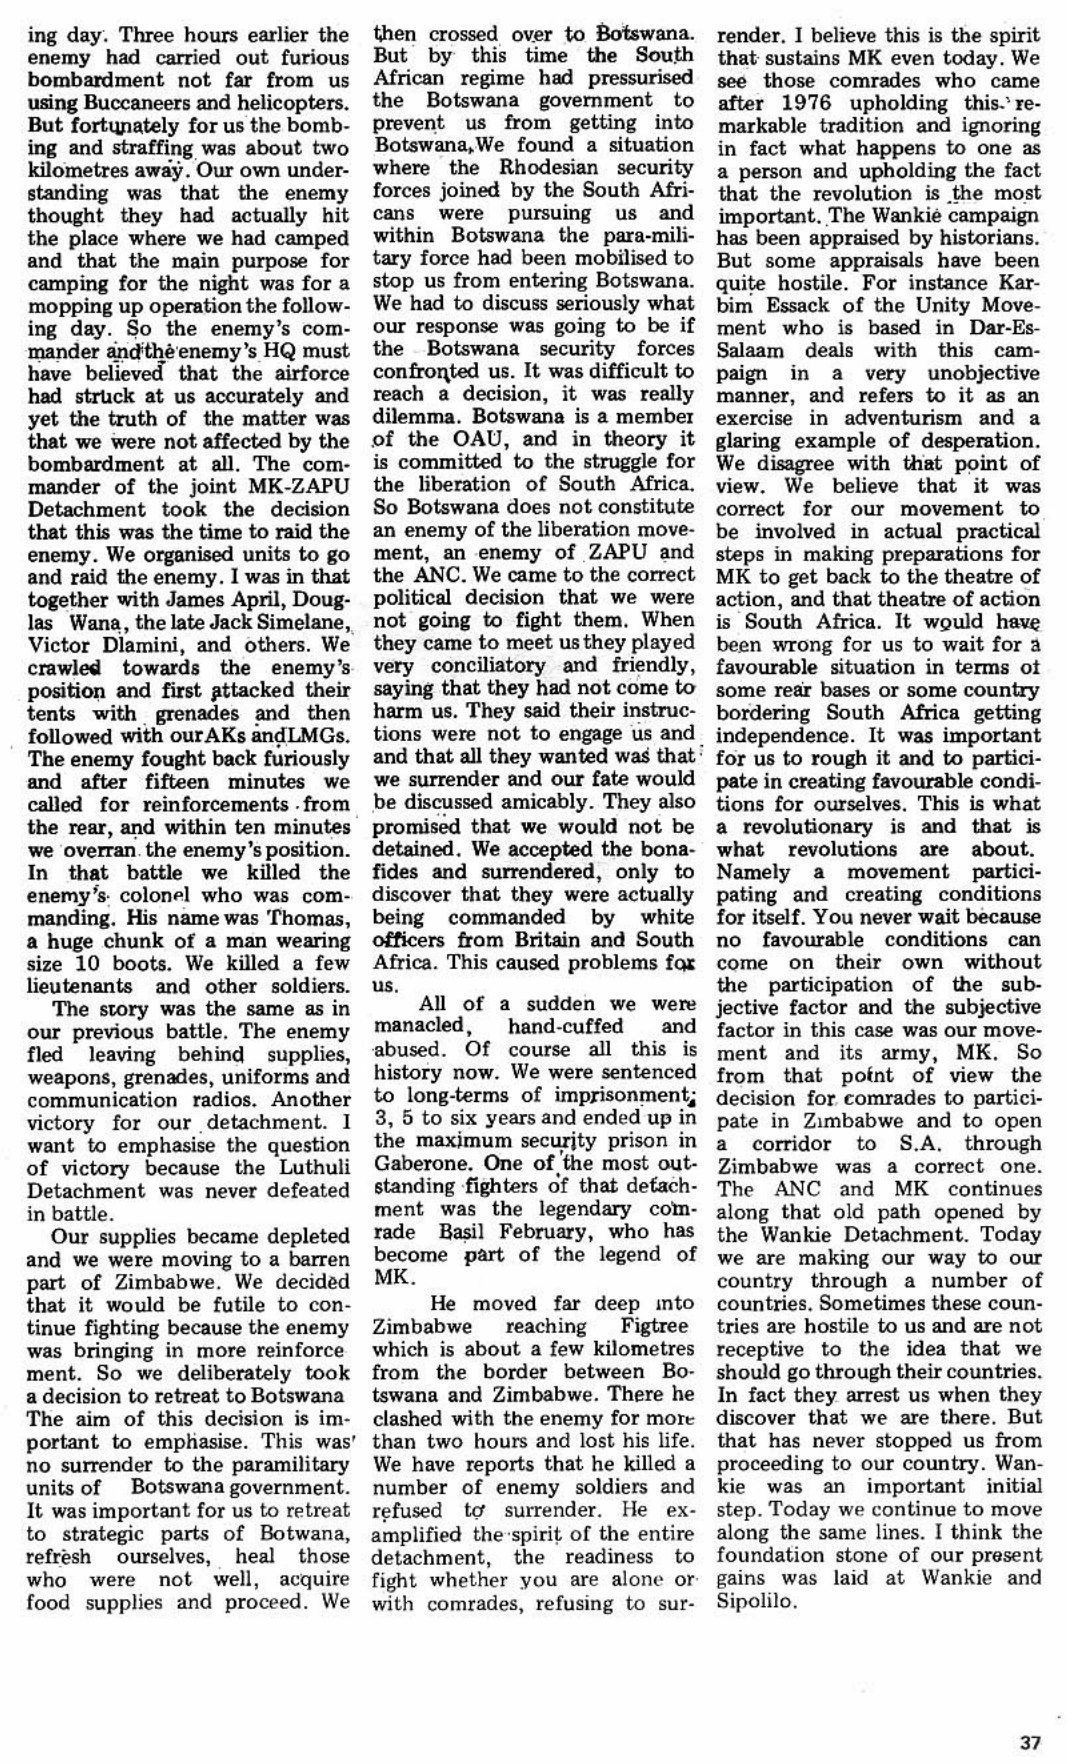 Fourth and final page of article on The Wankie Campaignas published in 1986 in the journal Dawn